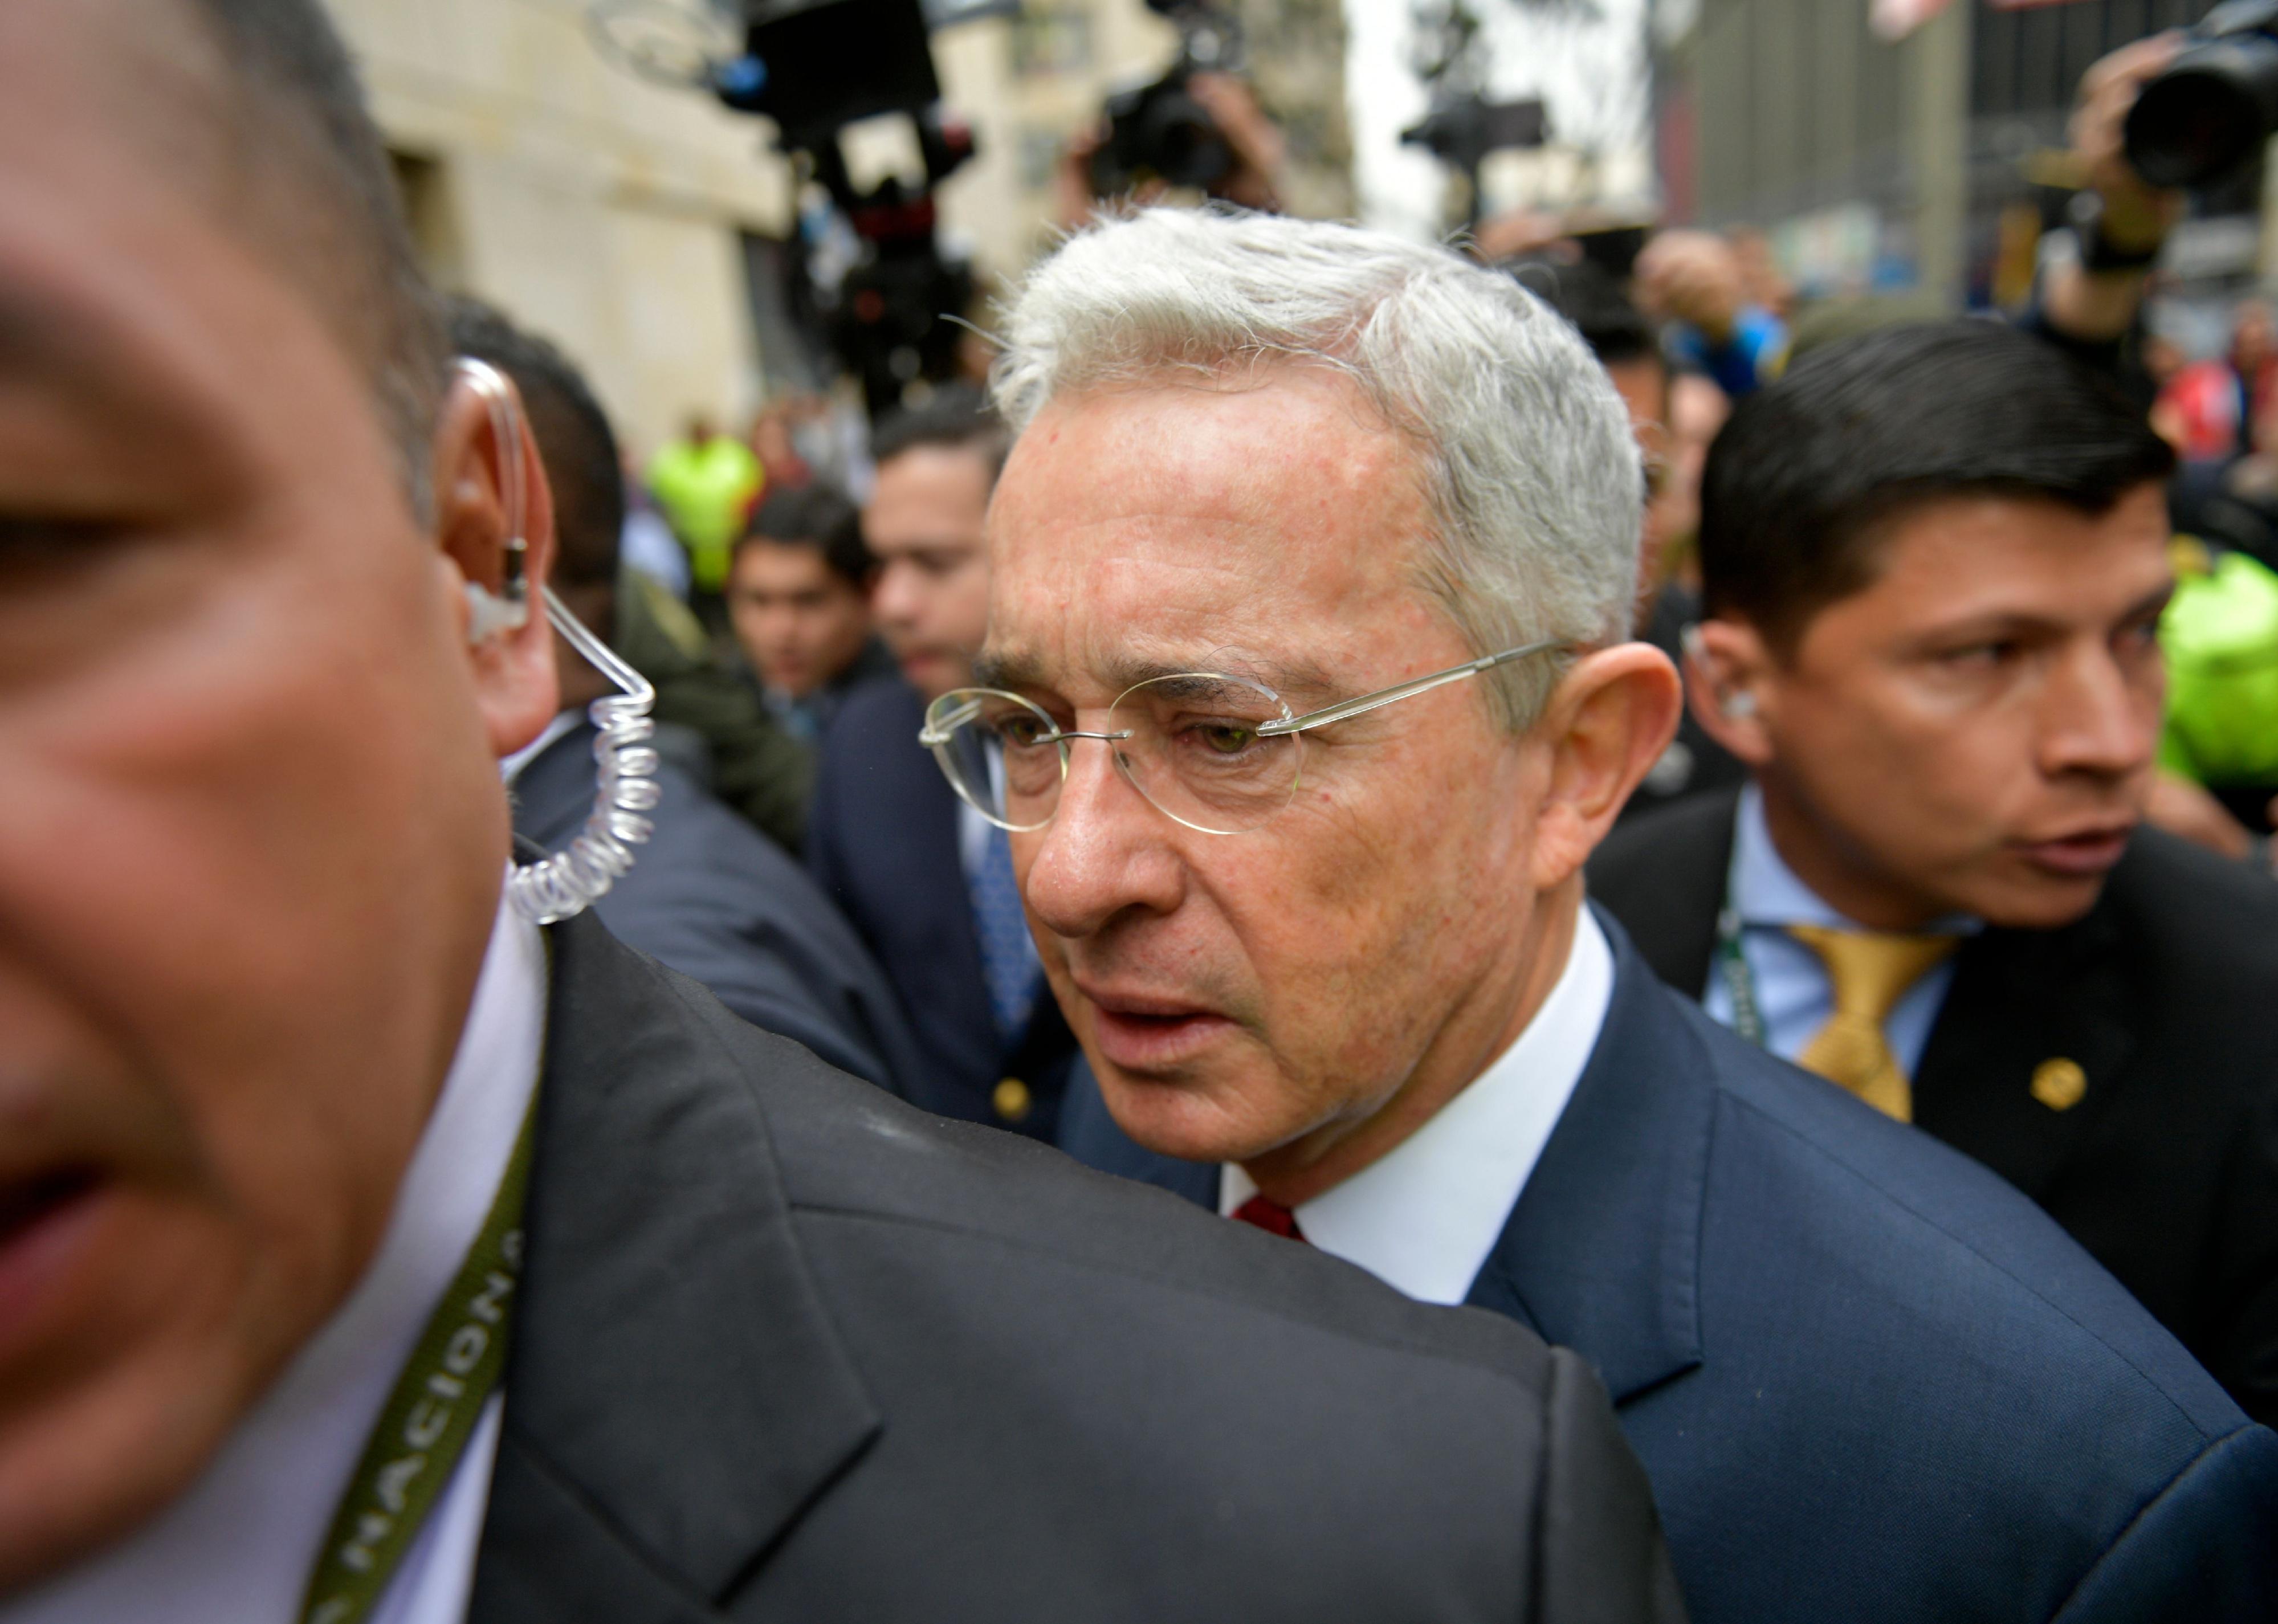 Alvaro Uribe arrives to the Palace of Justice for a hearing before the Supreme Court of Justice